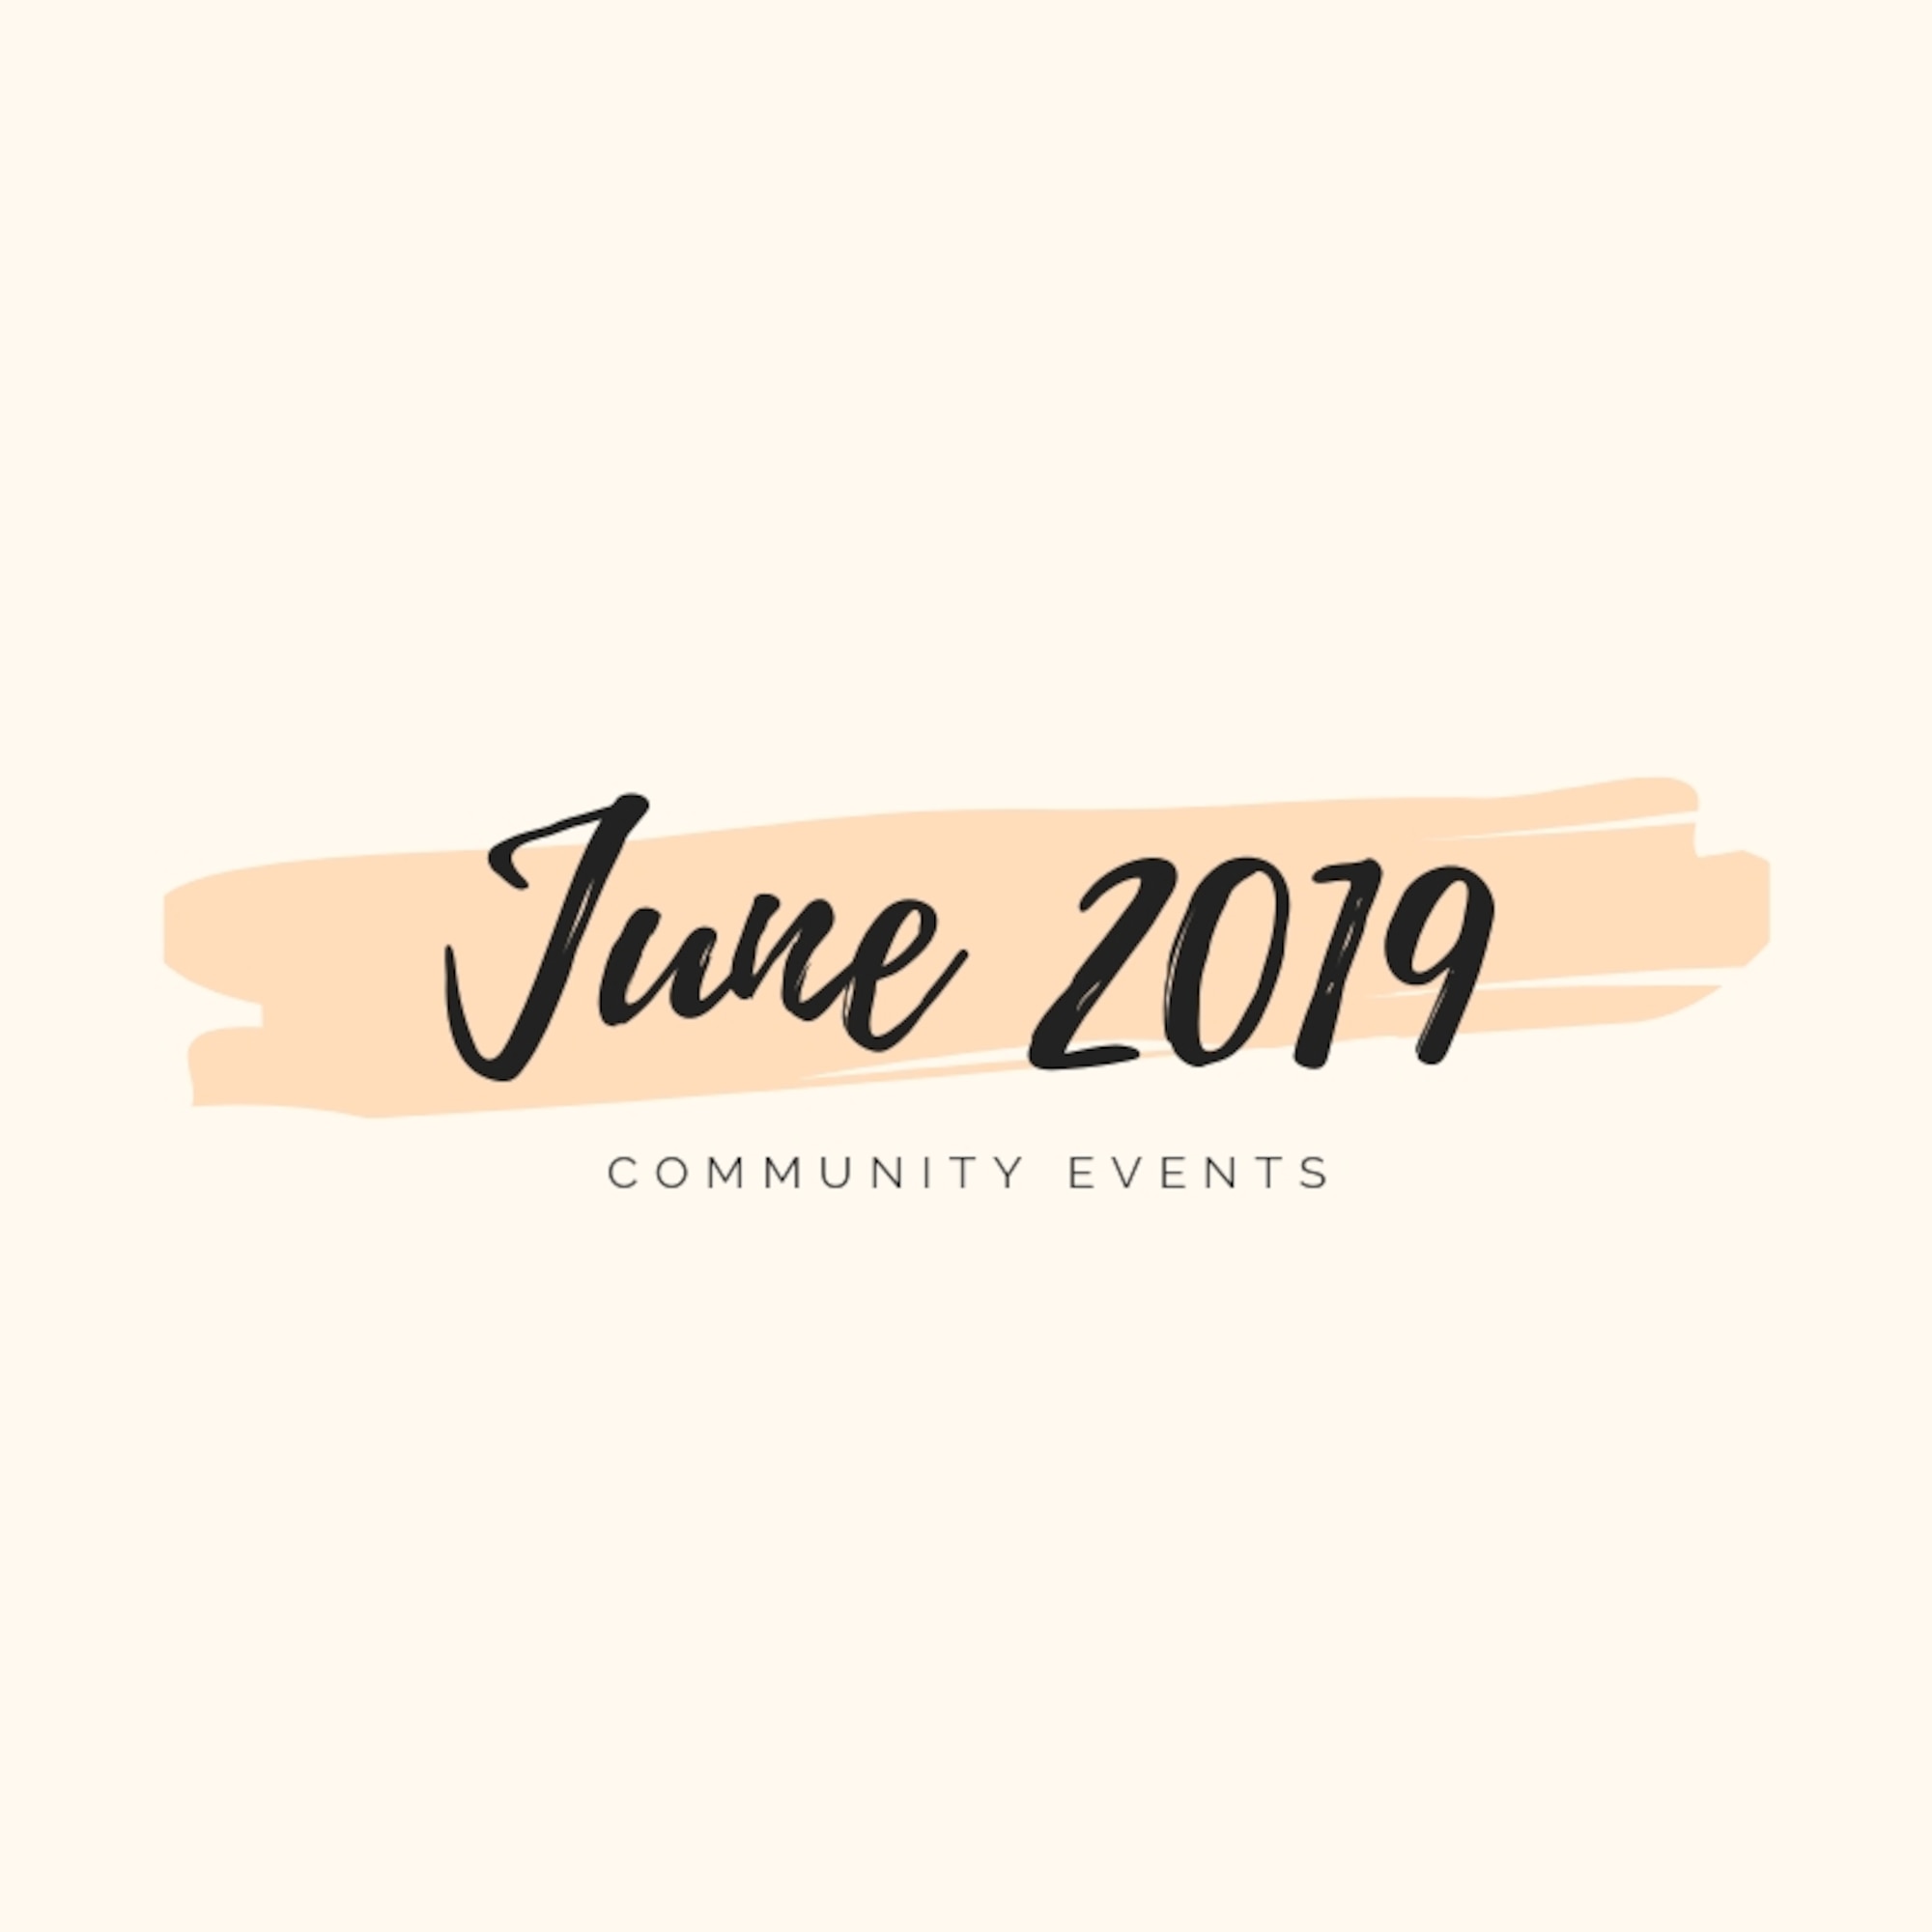 The month of June includes four local events offering attendees opportunities to continue building partnerships among their Japanese neighbors.